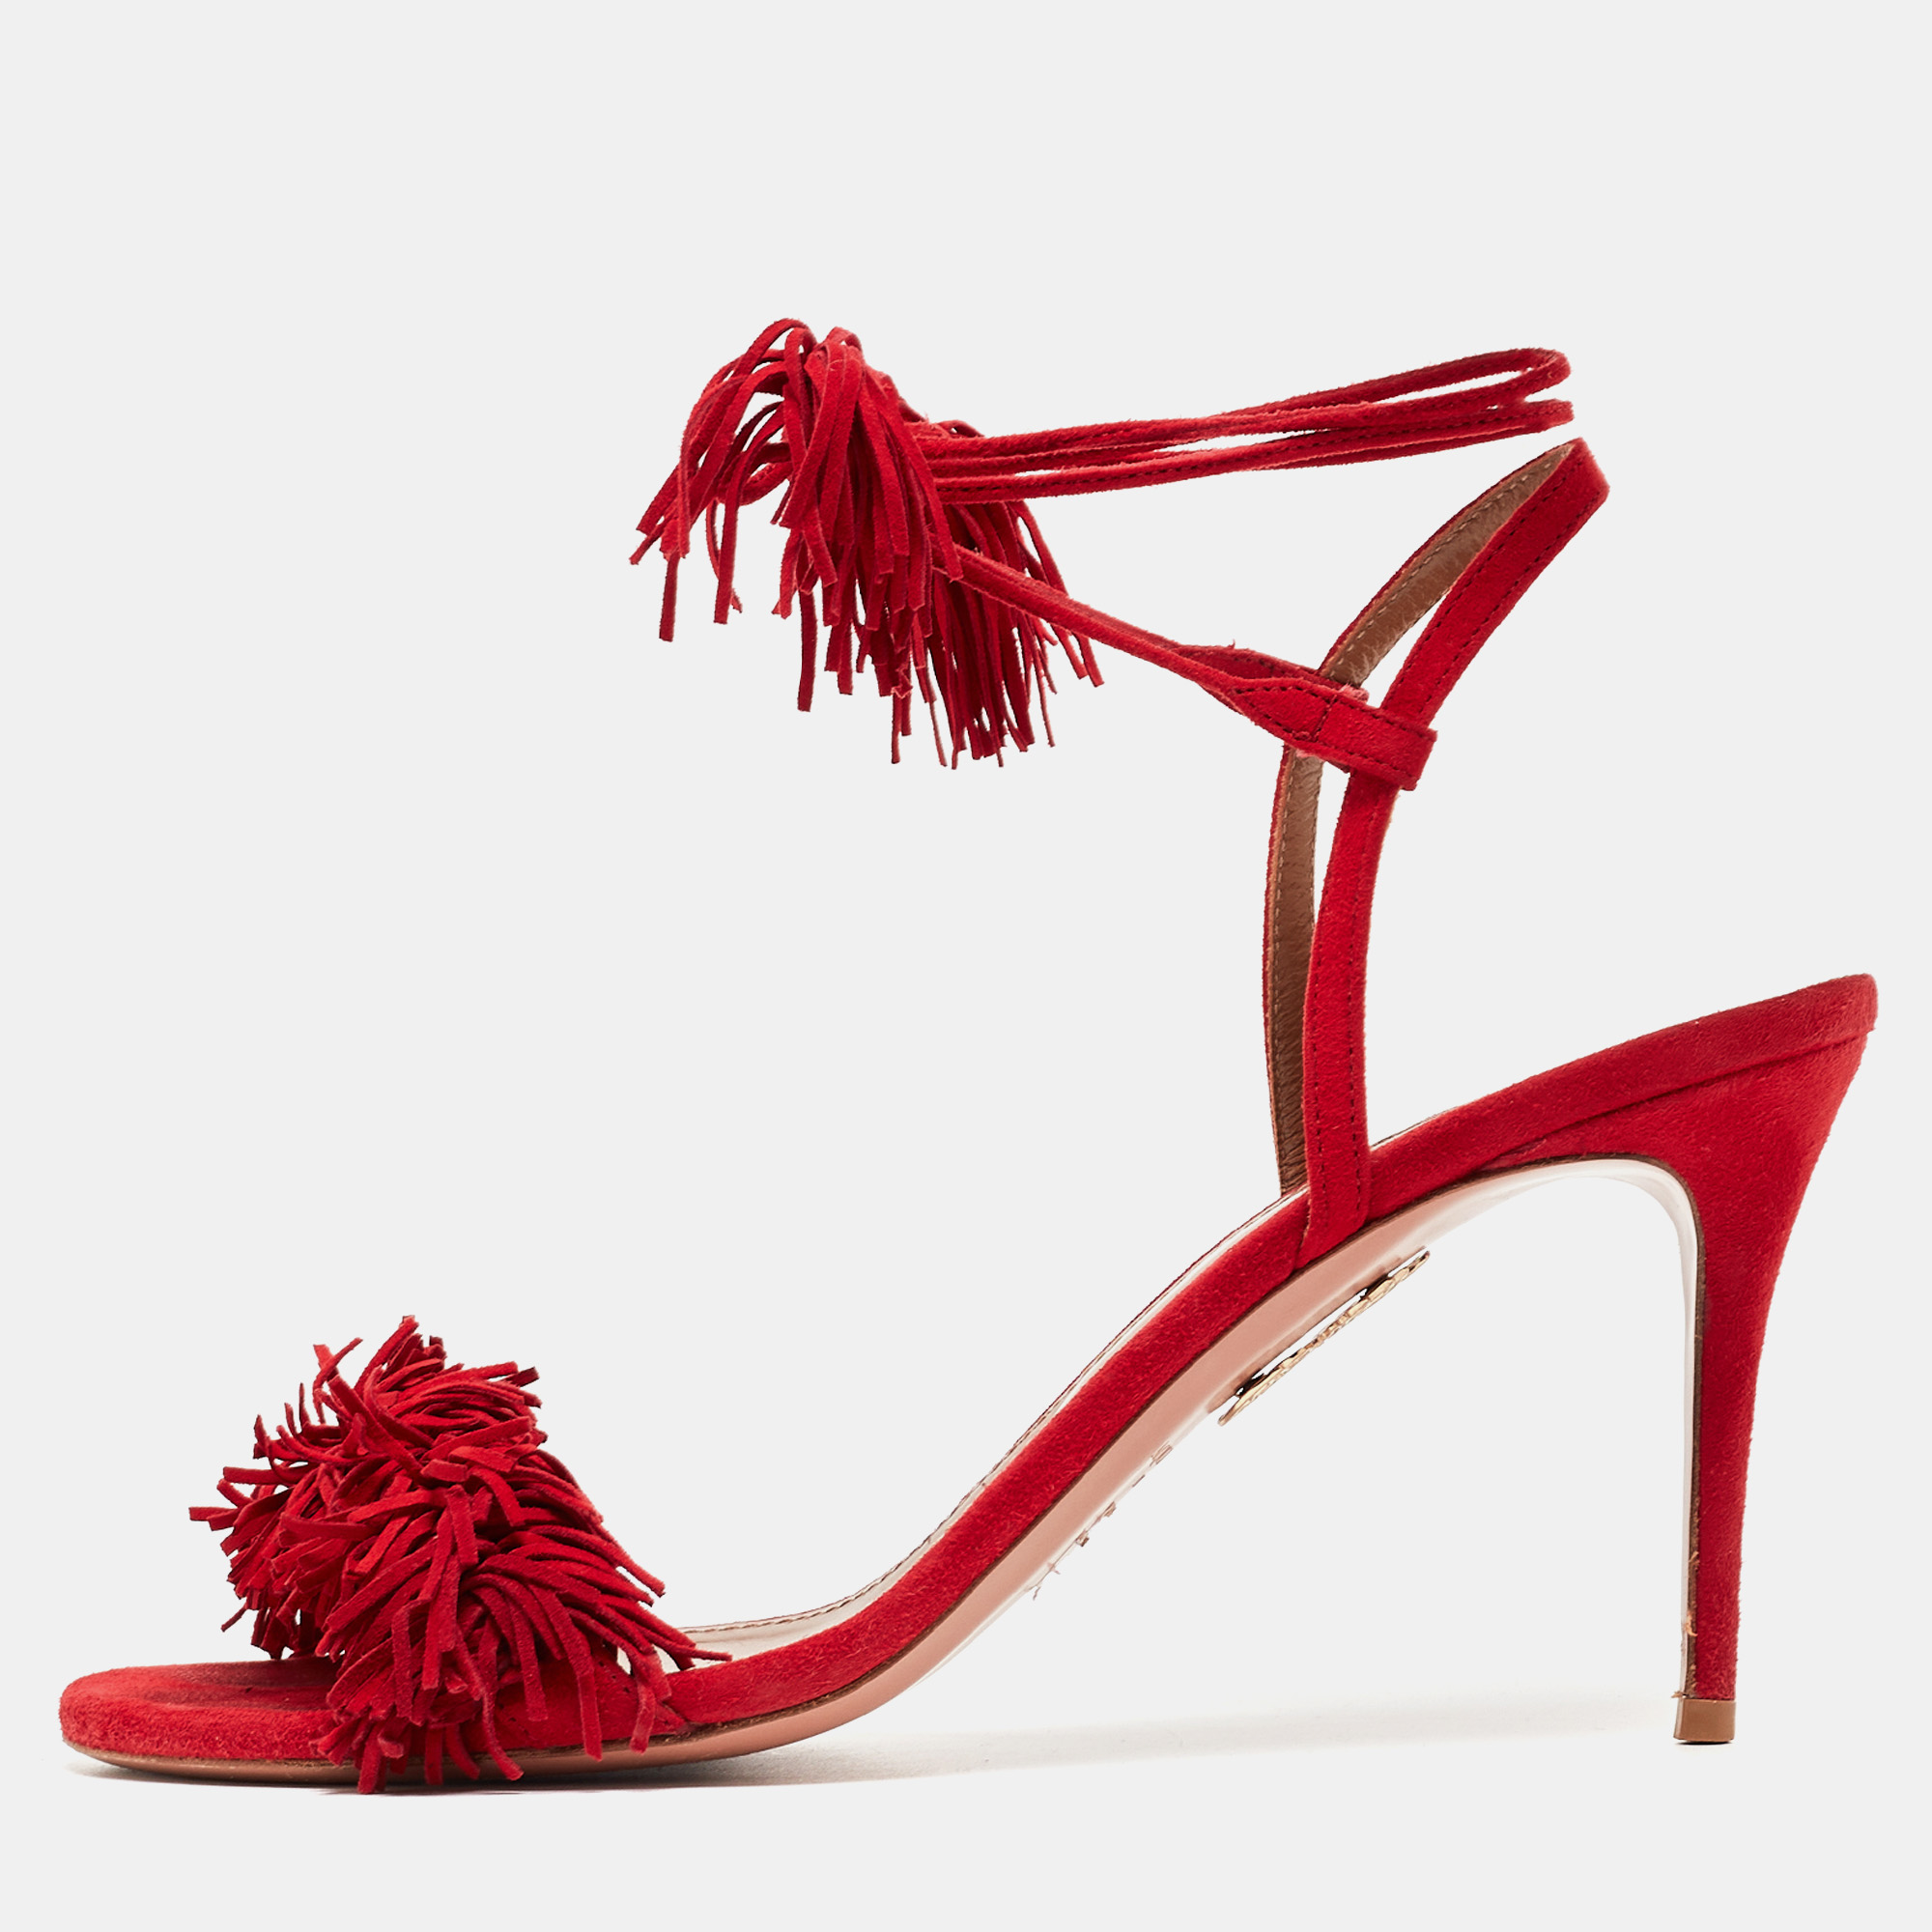 Pre-owned Aquazzura Red Fringed Suede Wild Thing Ankle Wrap Sandals Size 39